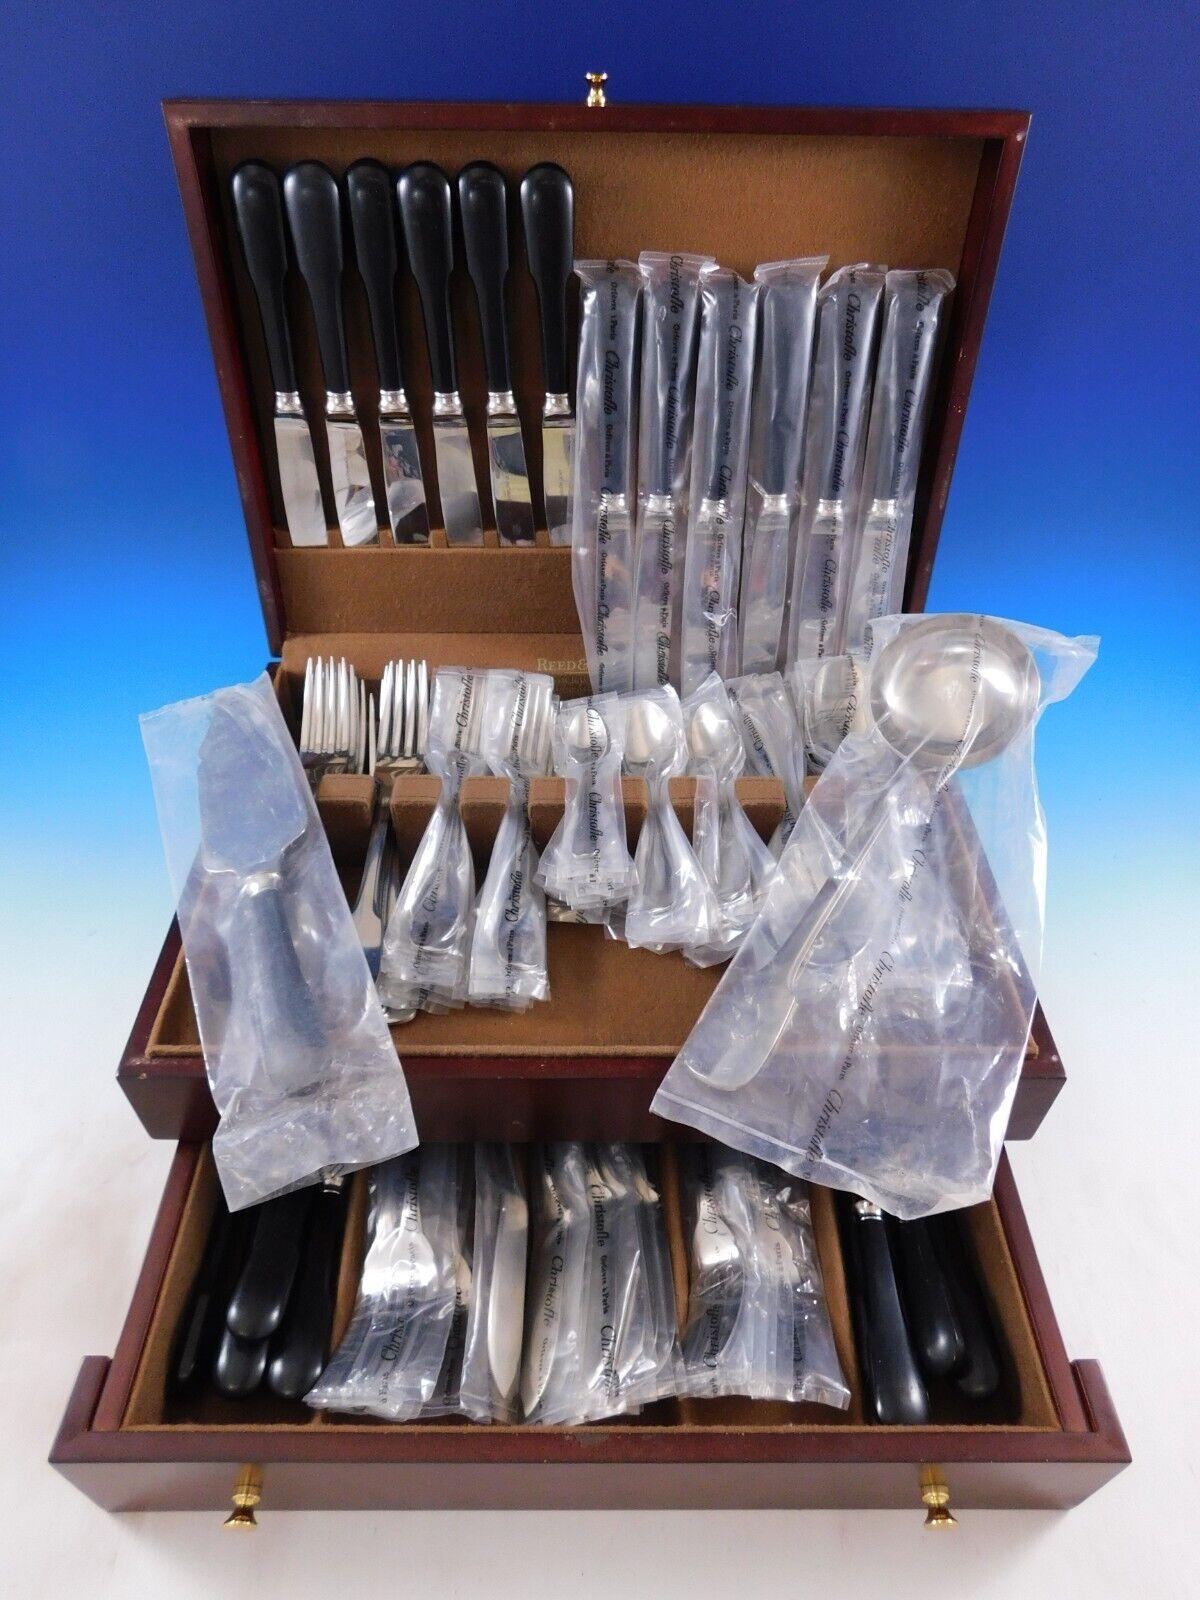 Bearn by Christofle France Stainless Steel Flatware set - 110 pieces. This set includes:

12 Dinner Size Knives, ebony handles, 9 3/4